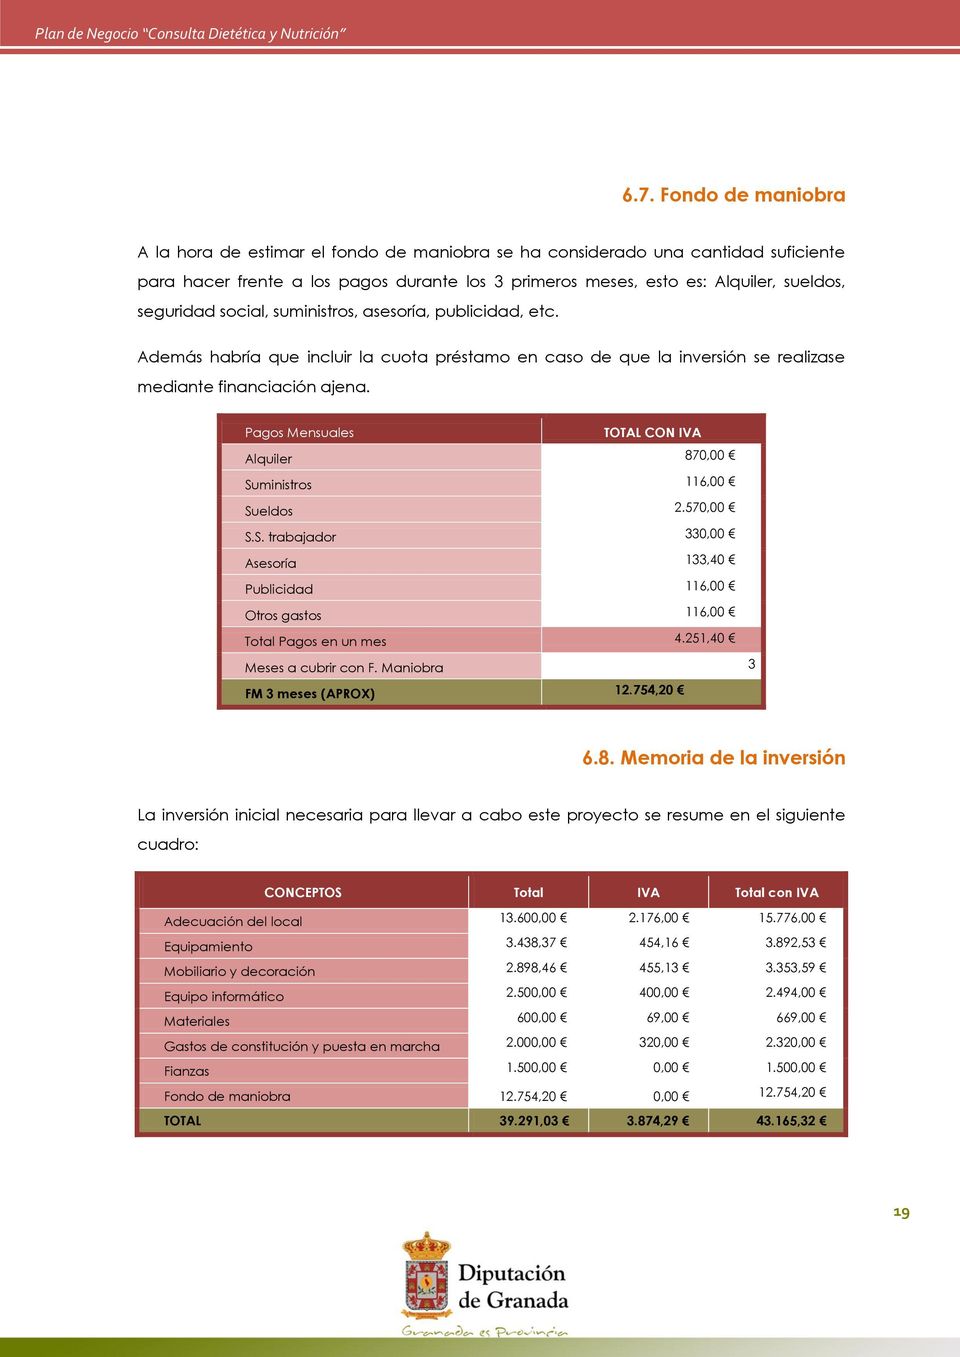 Pags Mensuales TOTAL CON IVA Alquiler 870,00 Suministrs 116,00 Suelds 2.570,00 S.S. trabajadr 330,00 Asesría 133,40 Publicidad 116,00 Otrs gasts 116,00 Ttal Pags en un mes 4.